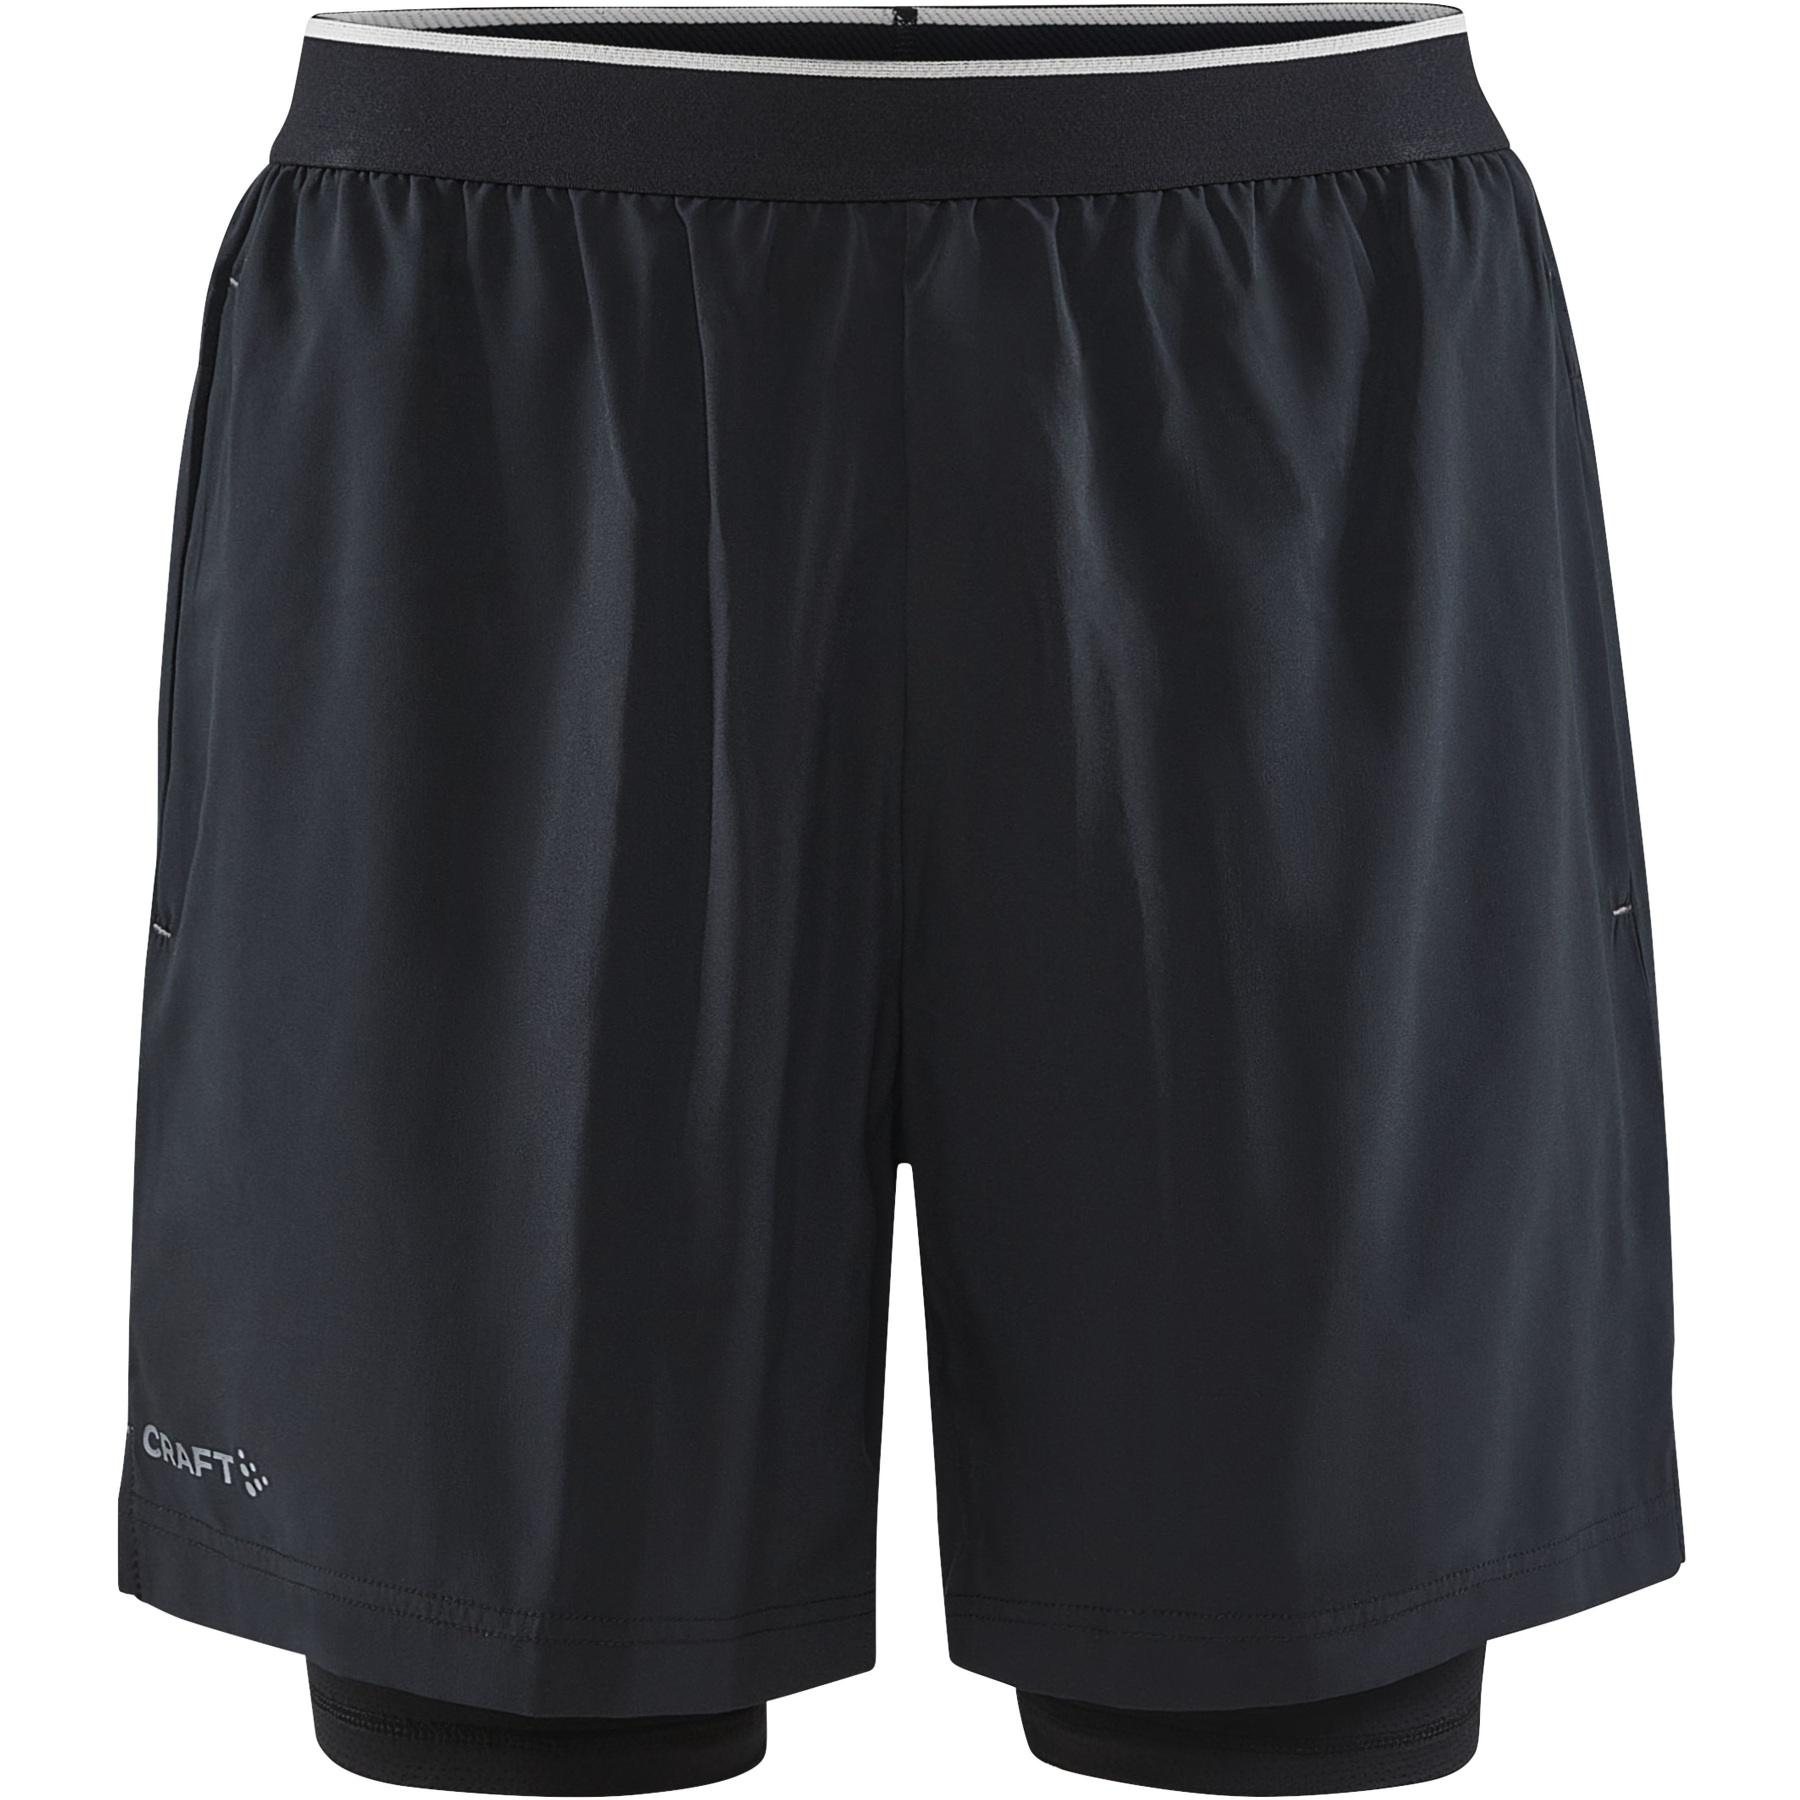 Productfoto van CRAFT ADV Charge Men&#039;s 2-In-1 Stretch Shorts - Black